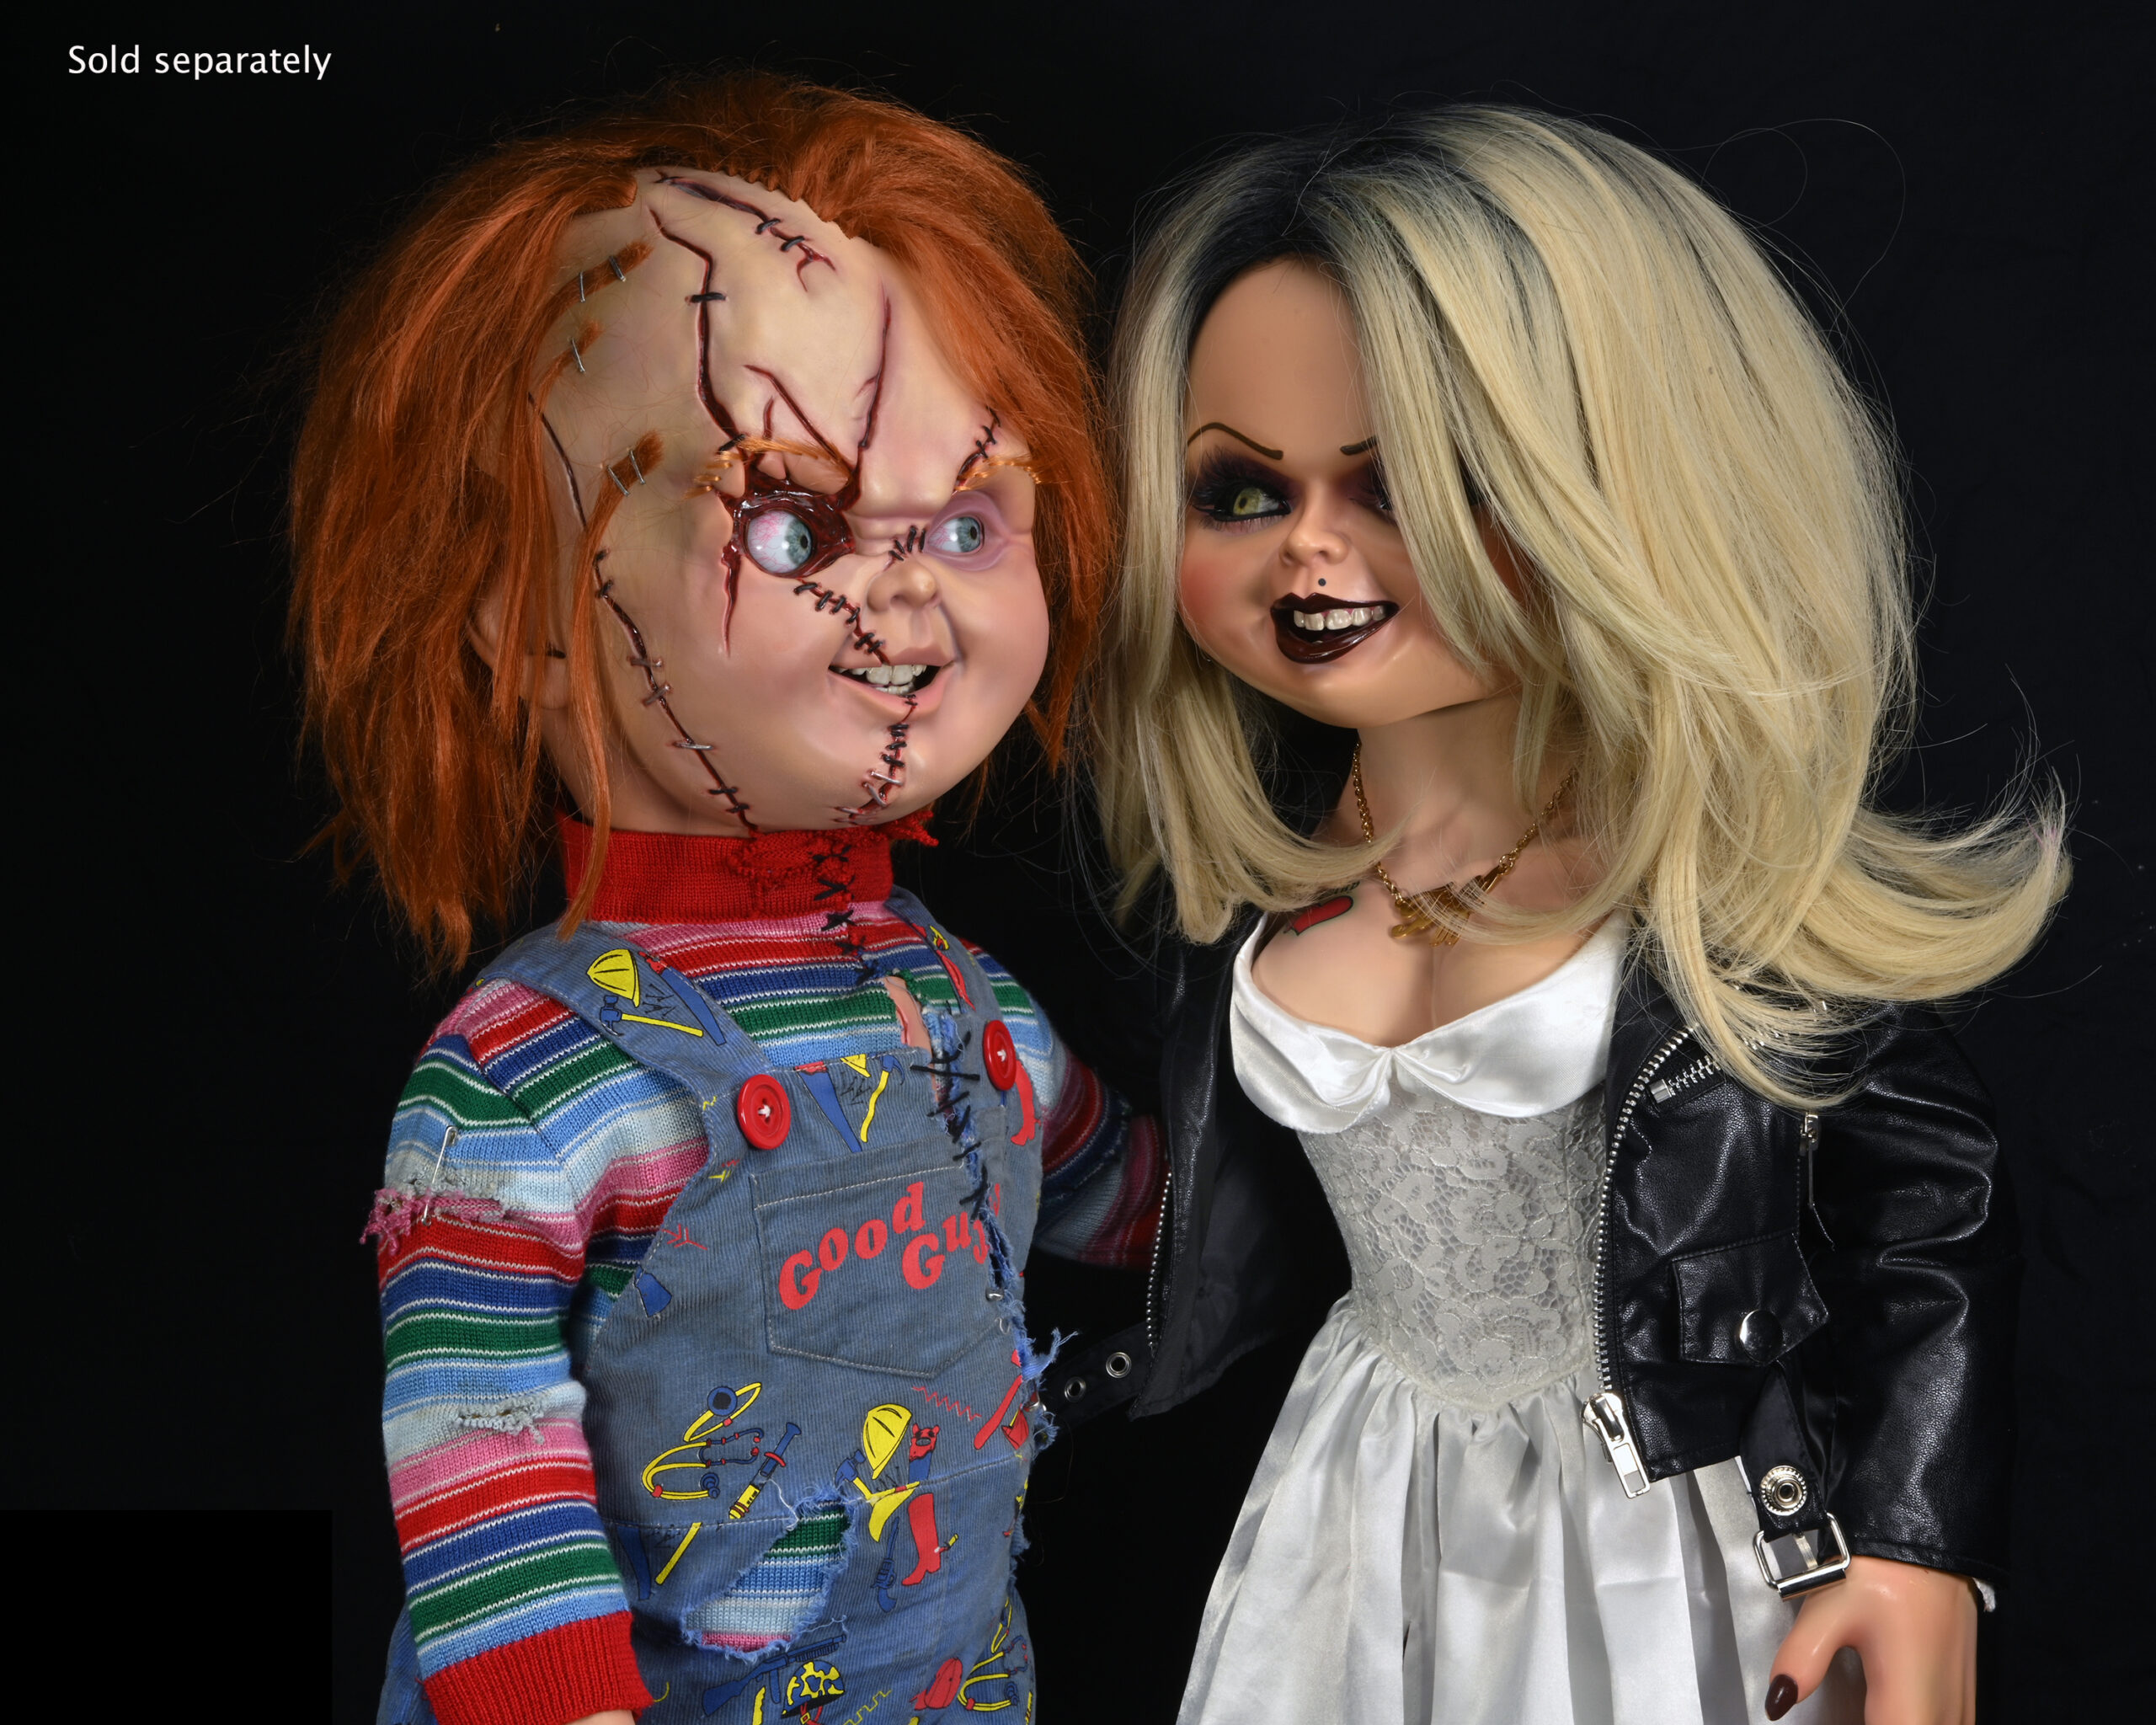 Chucky And His Bride Dolls